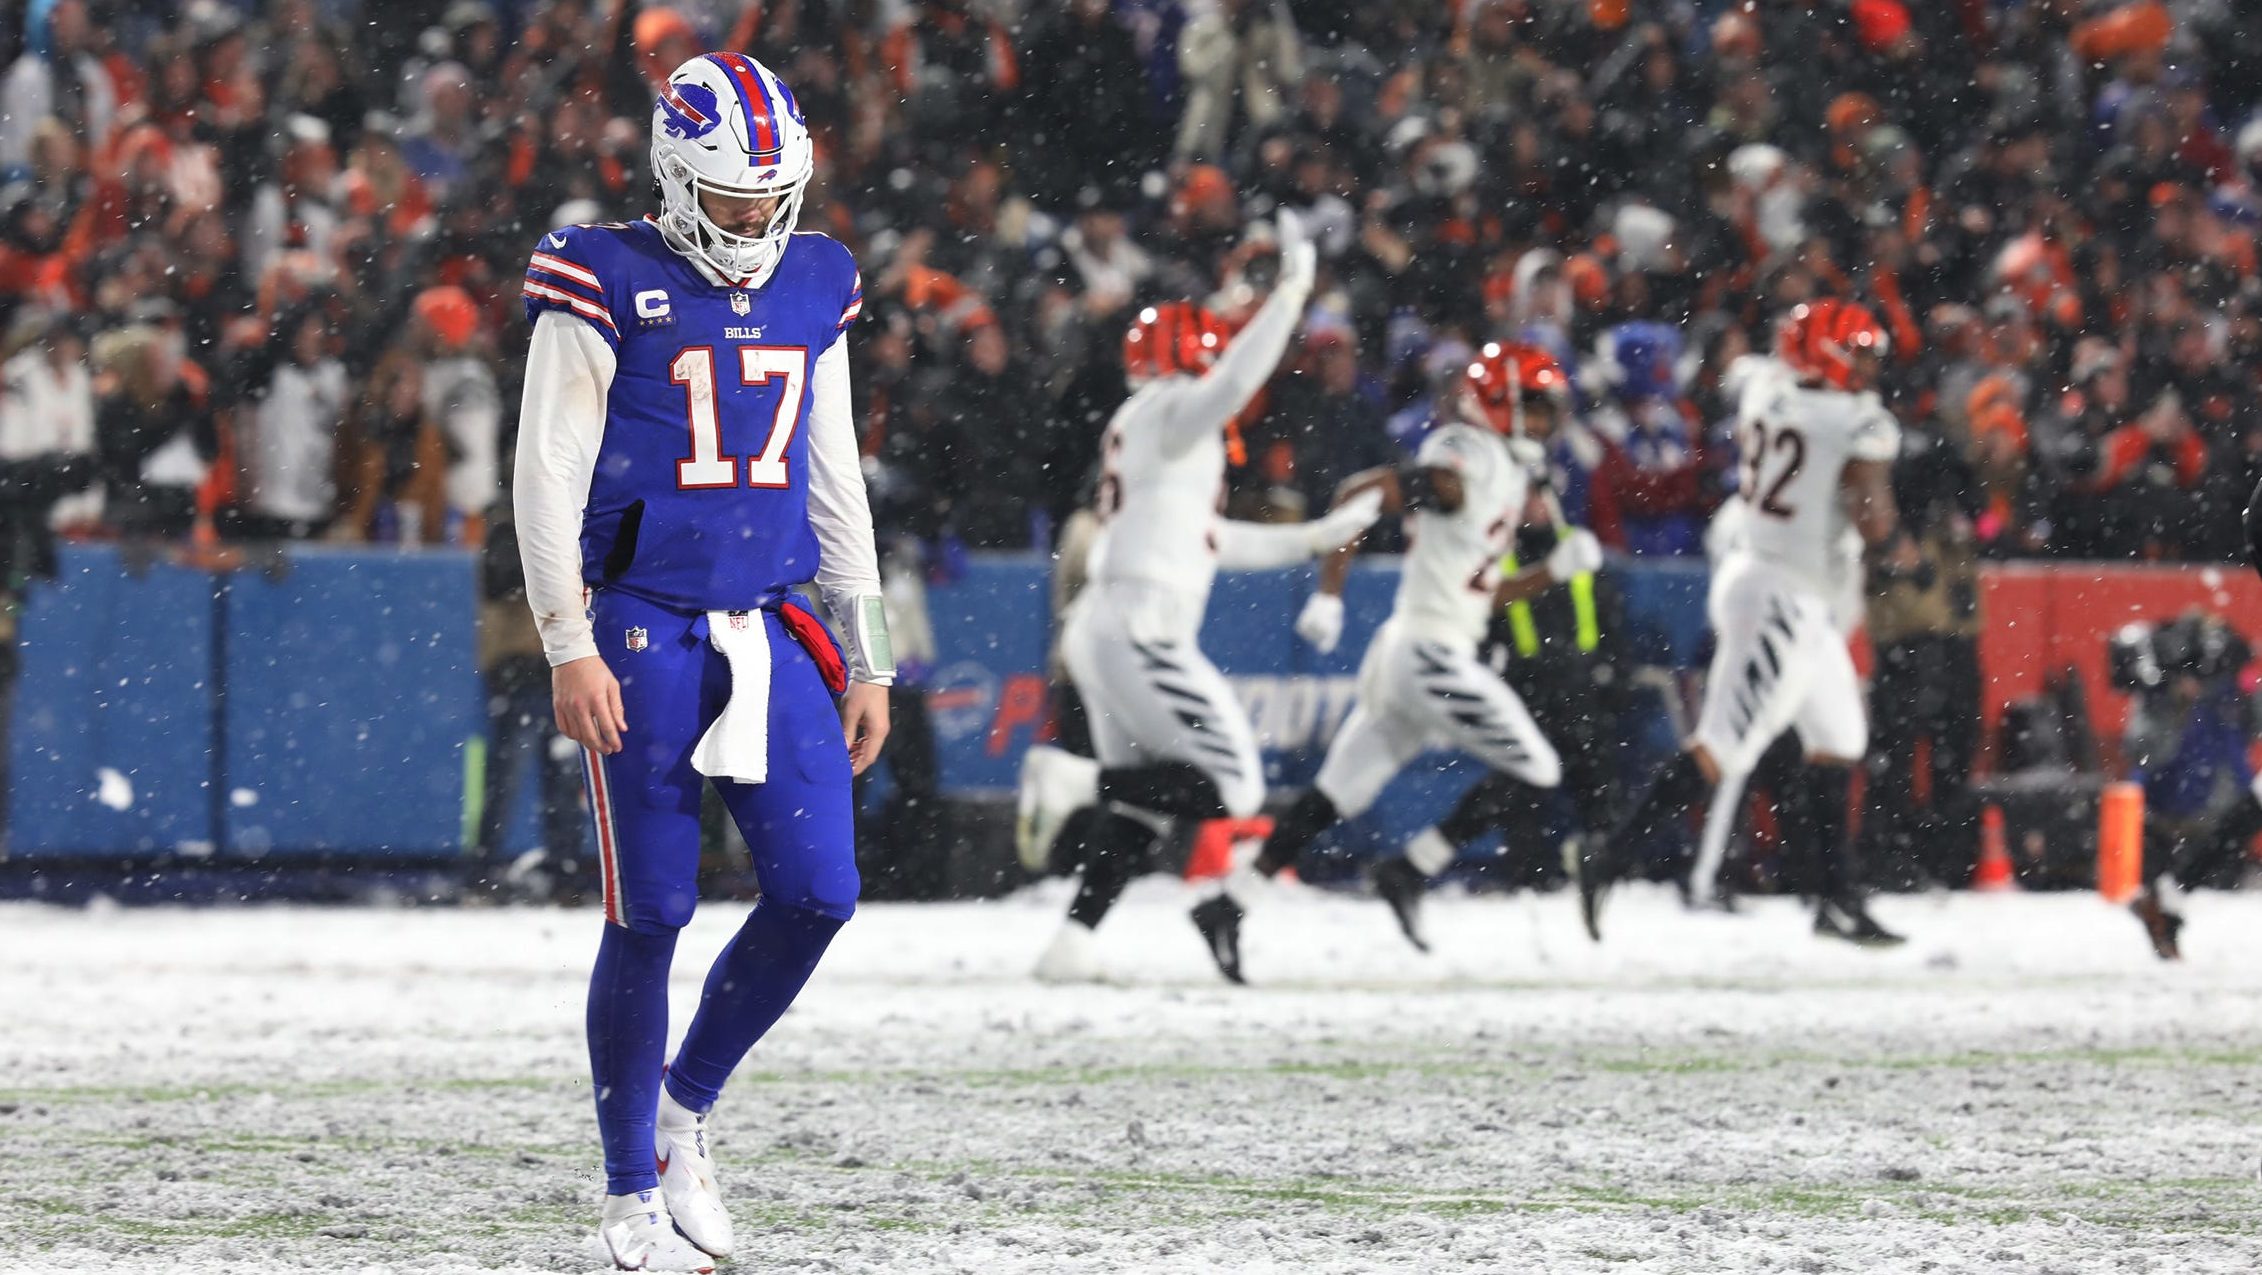 Up for Debate: What Does Future Hold for Bills after Meltdown vs. Bengals?